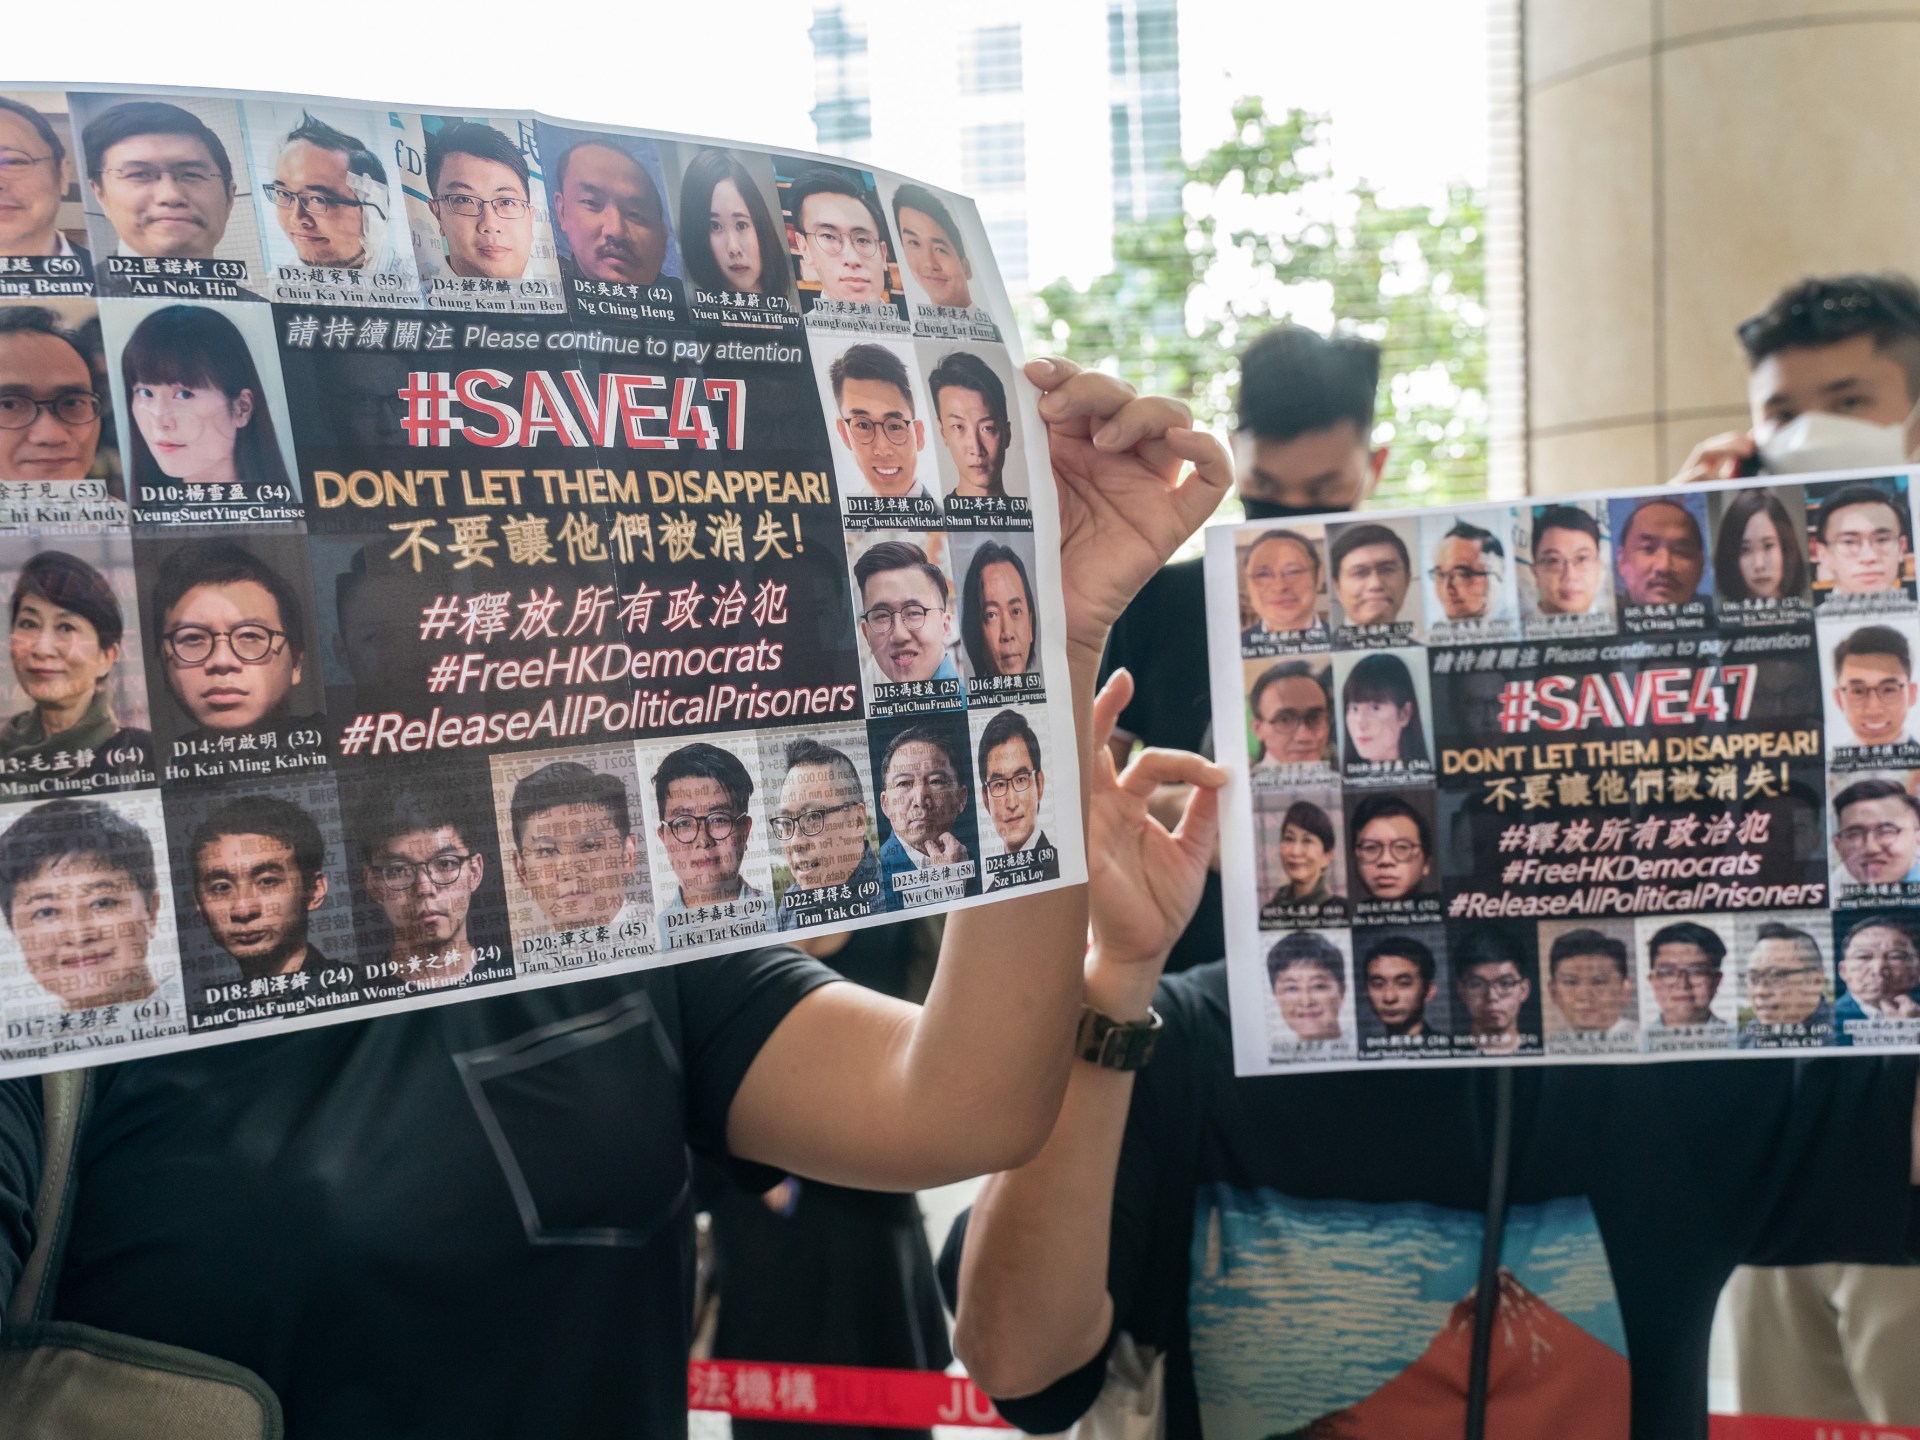 For Hong Kong’s arrested pro-democracy activists, justice must wait | Civil Rights News